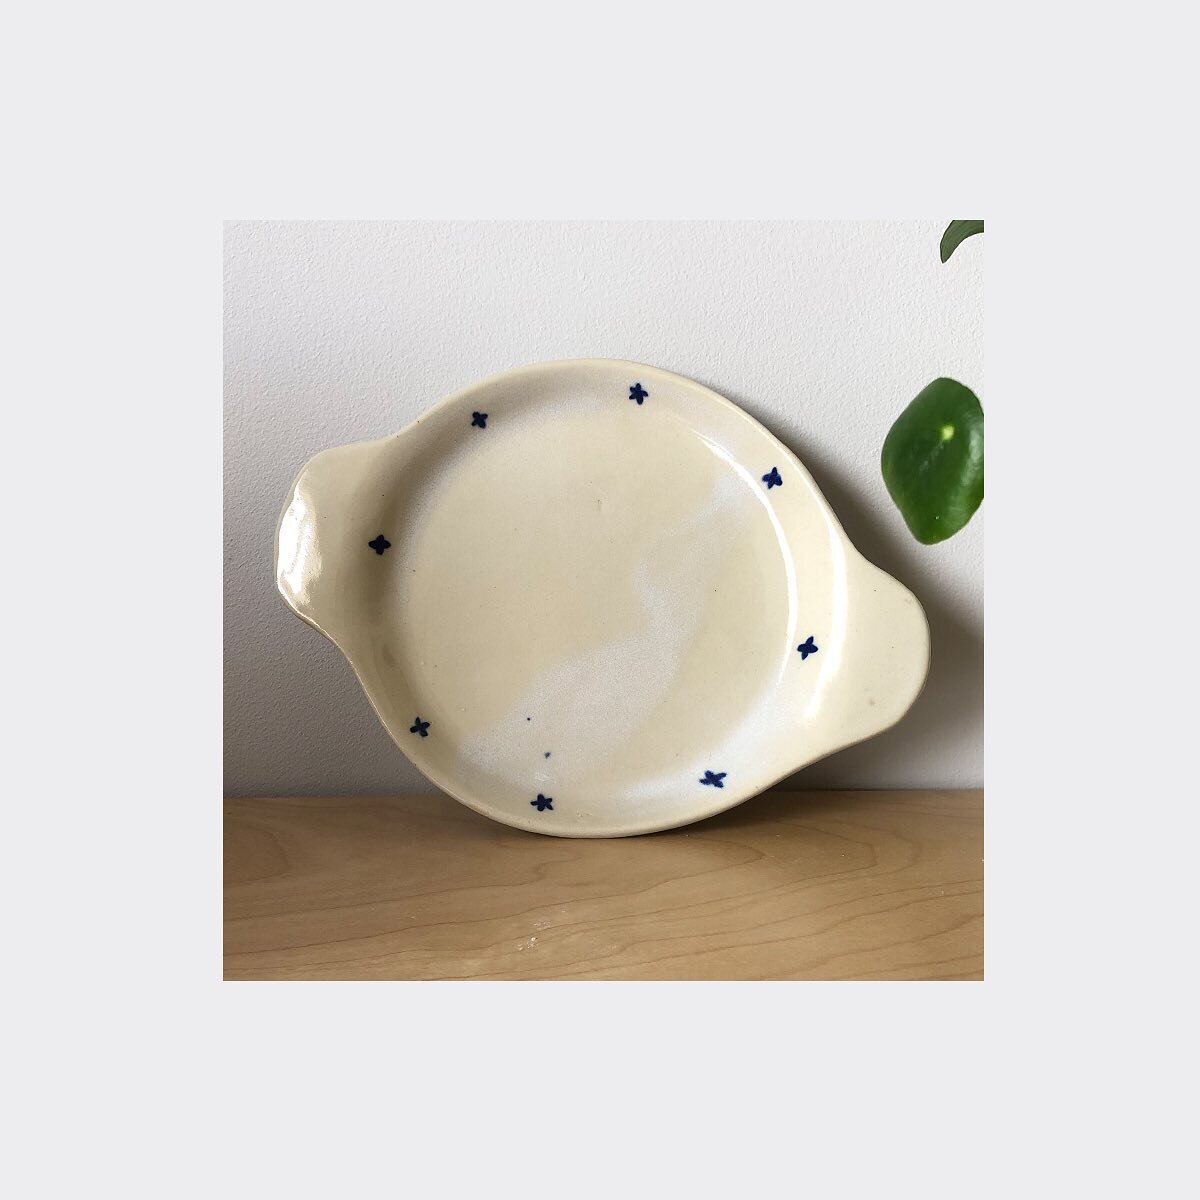 Second last market day tomorrow @localandaesthetic 🥳 Here&rsquo;s one of a few platters that will be available along with lots of other pieces too! 

Check out the @localandaesthetic and @fishsocialenterprise Instagrams for info on other stalls too 